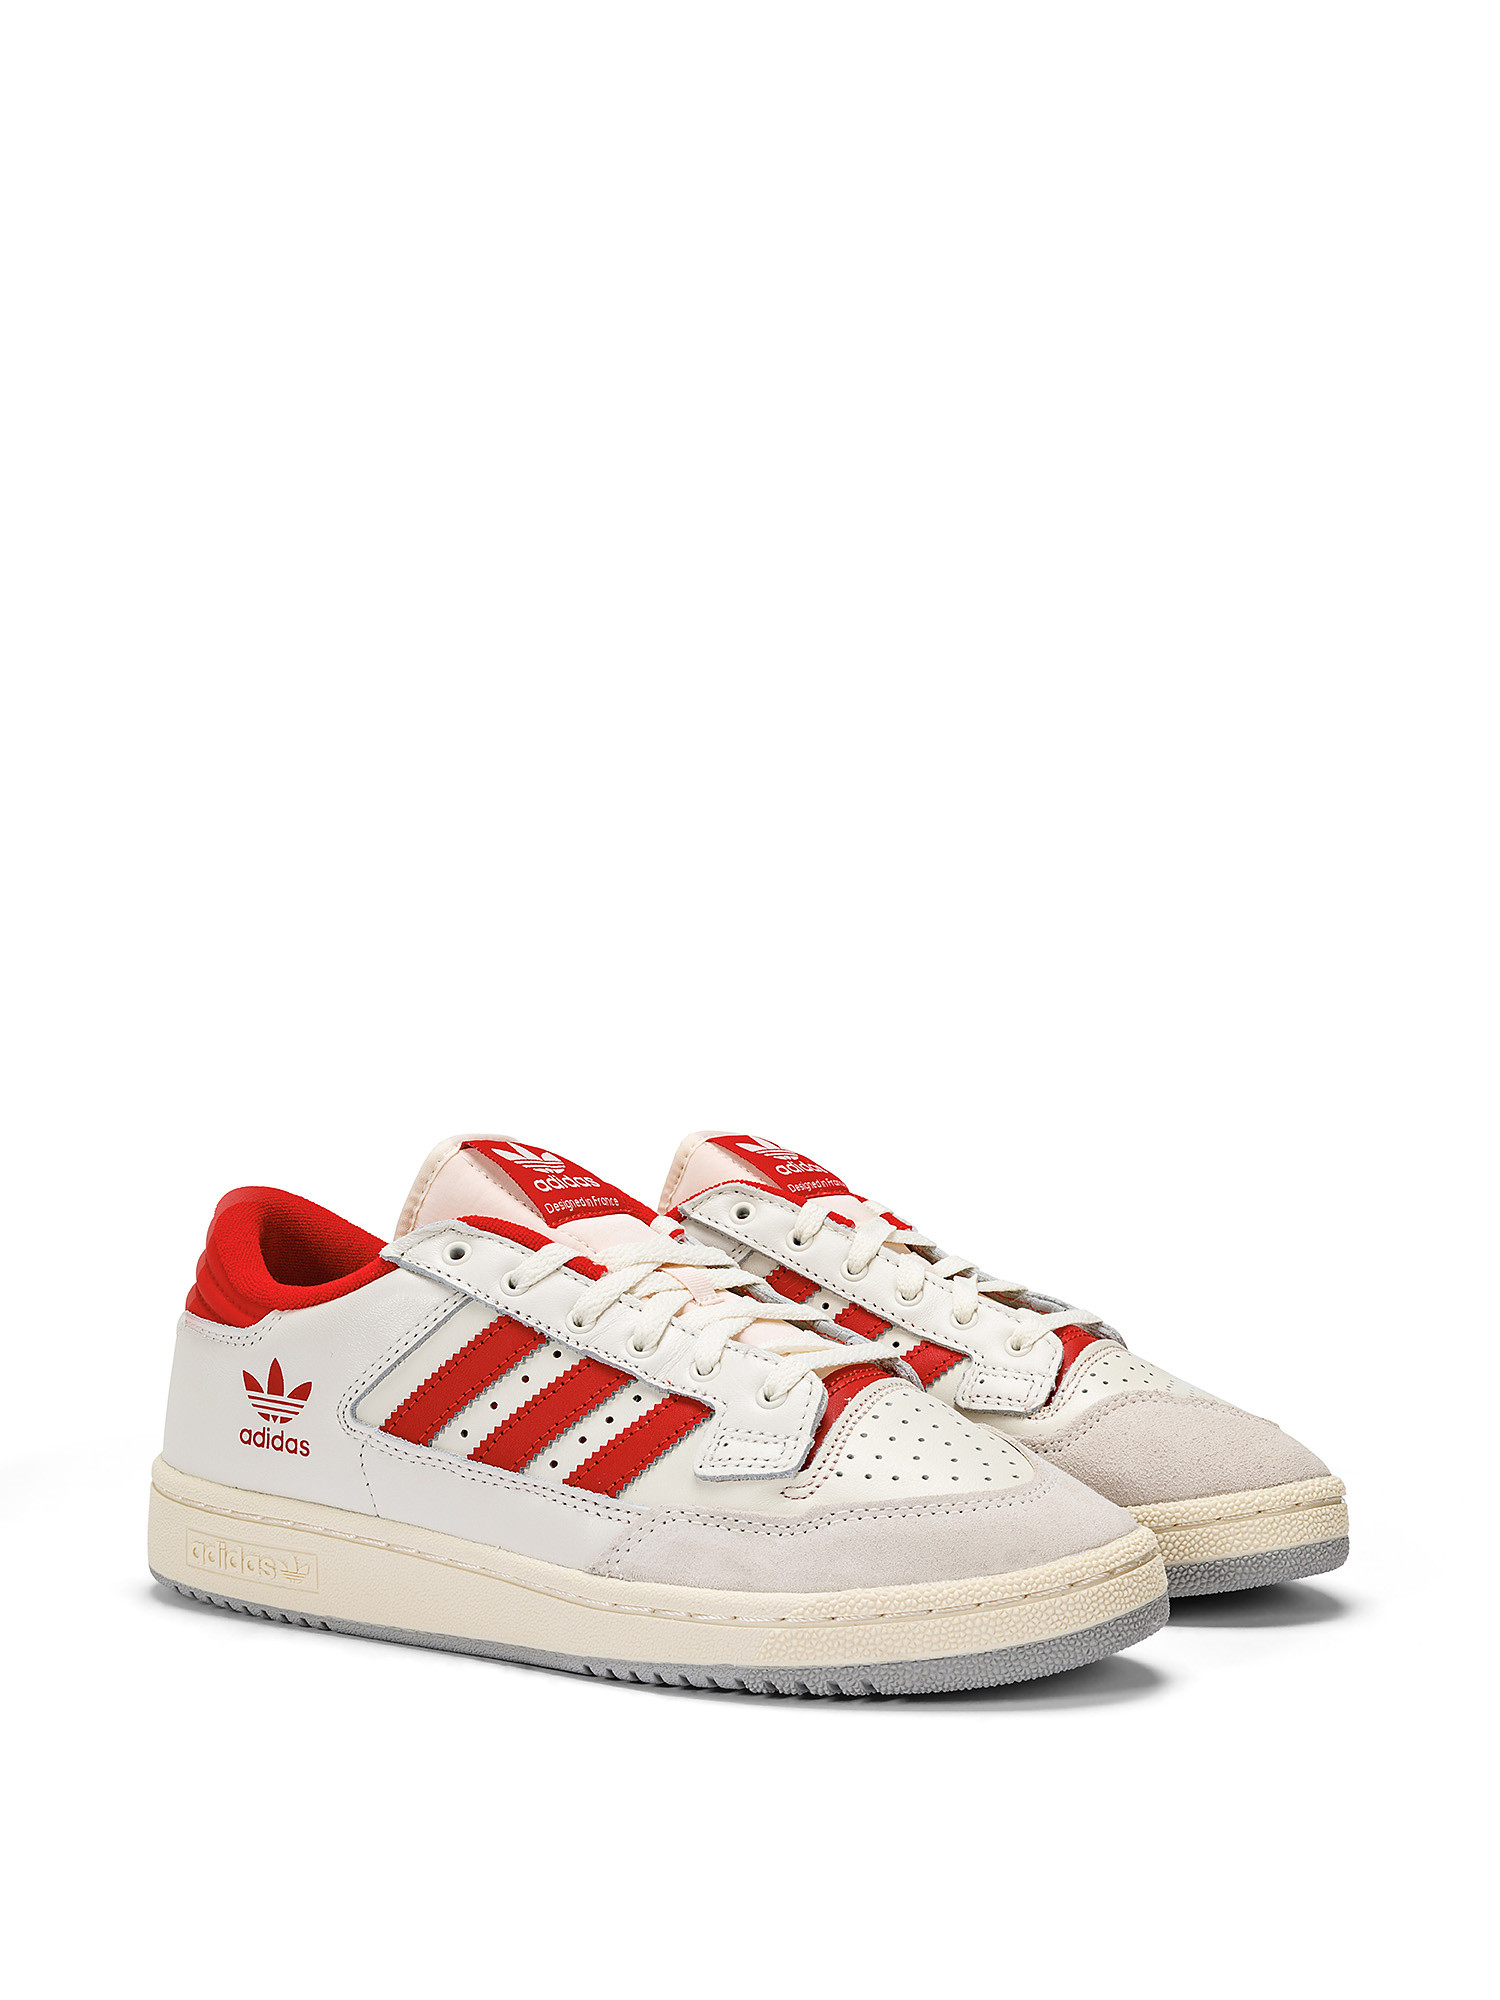 Adidas - Centennial 85 low shoes, White, large image number 8